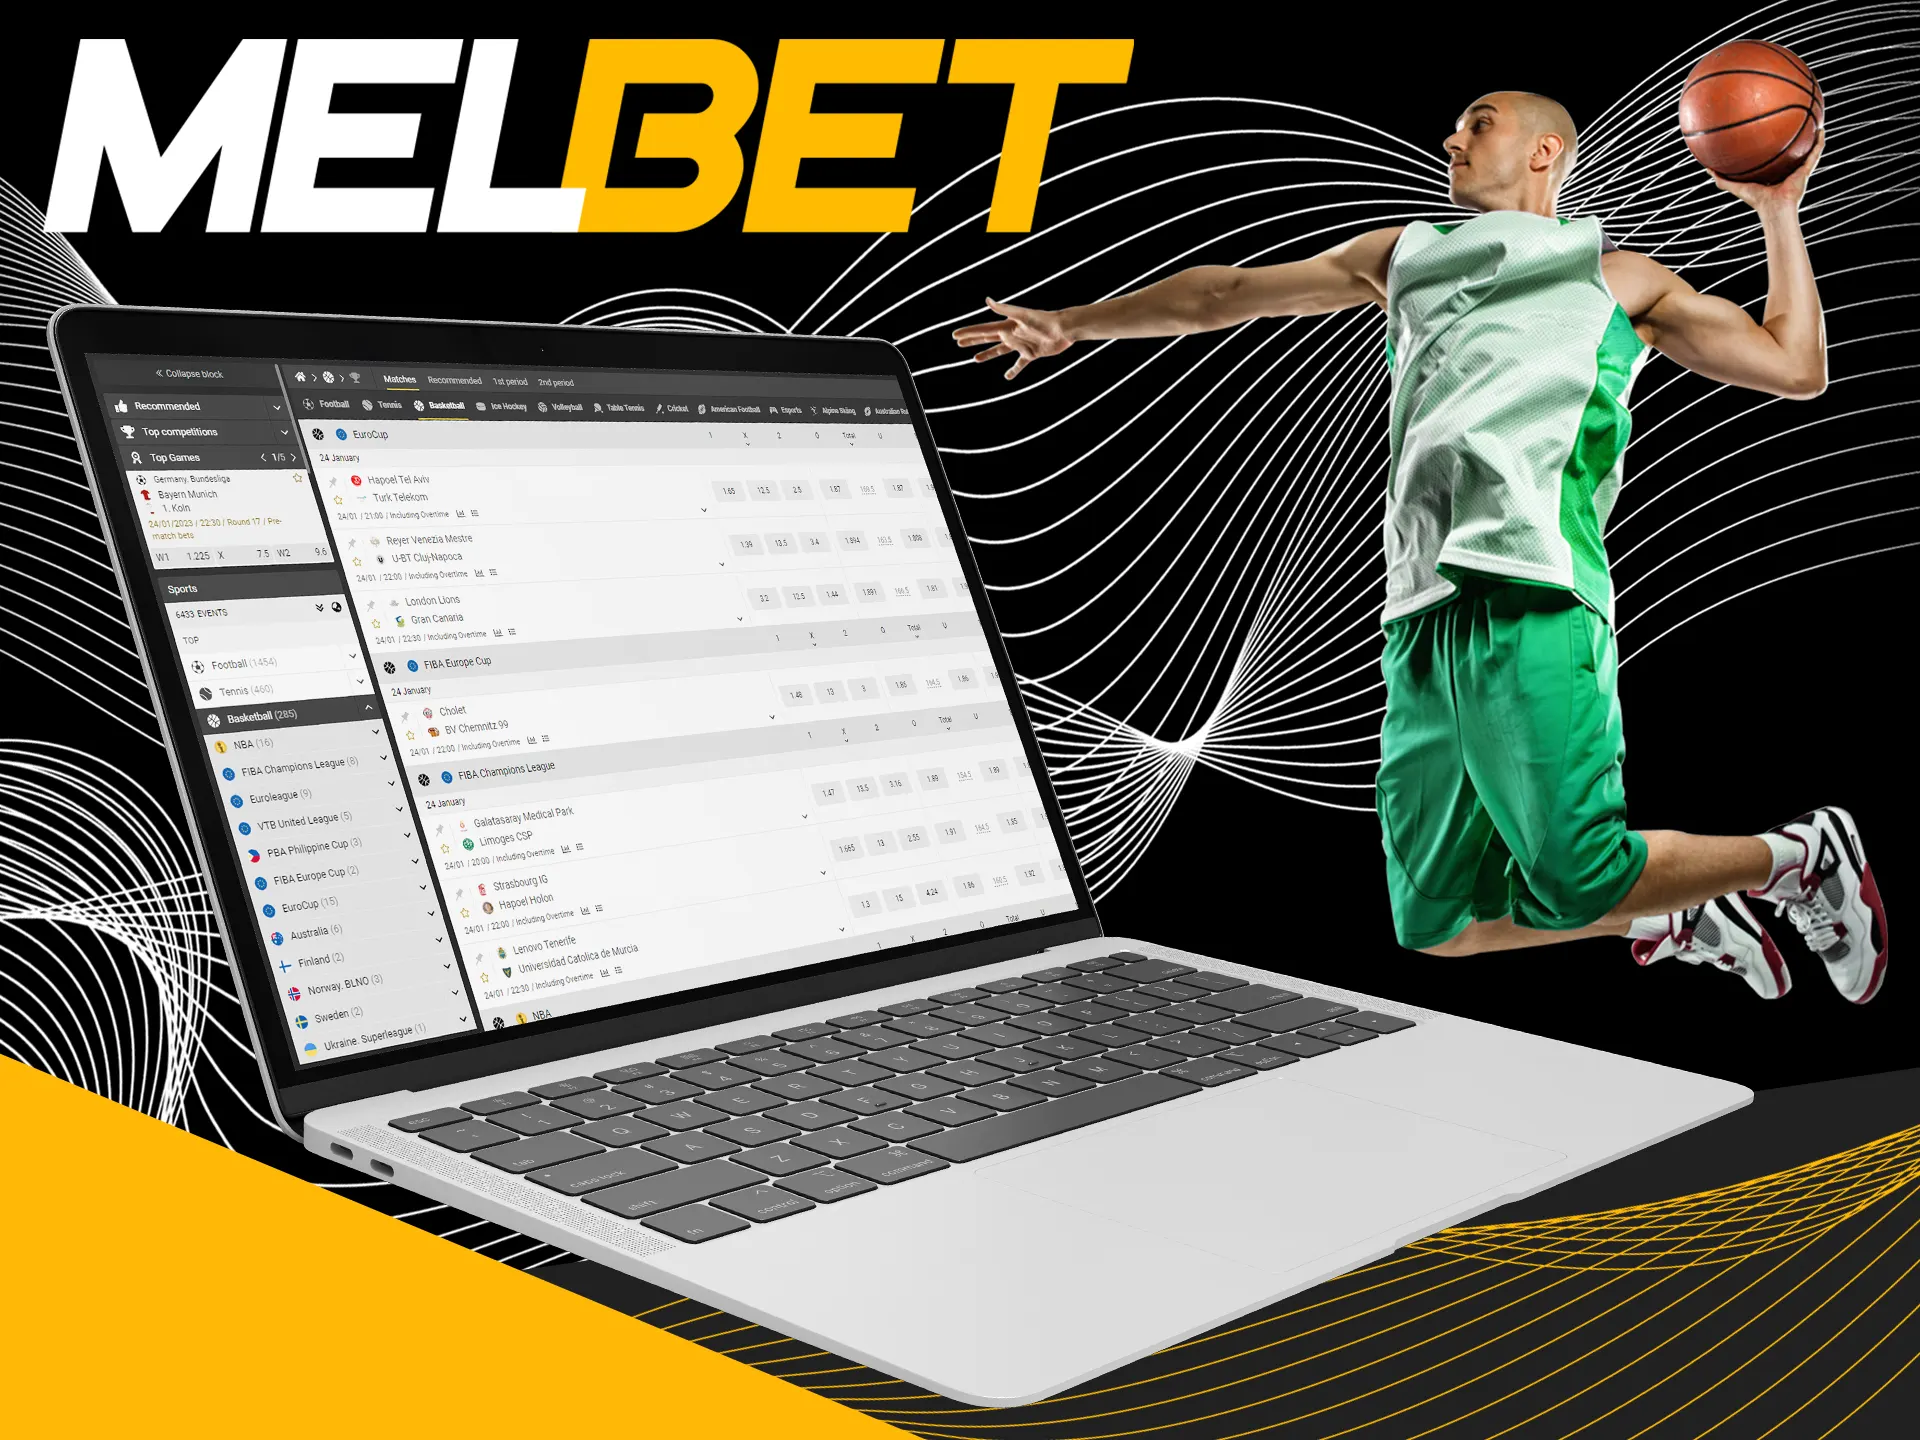 It's simple to make basketball bets at Melbet.